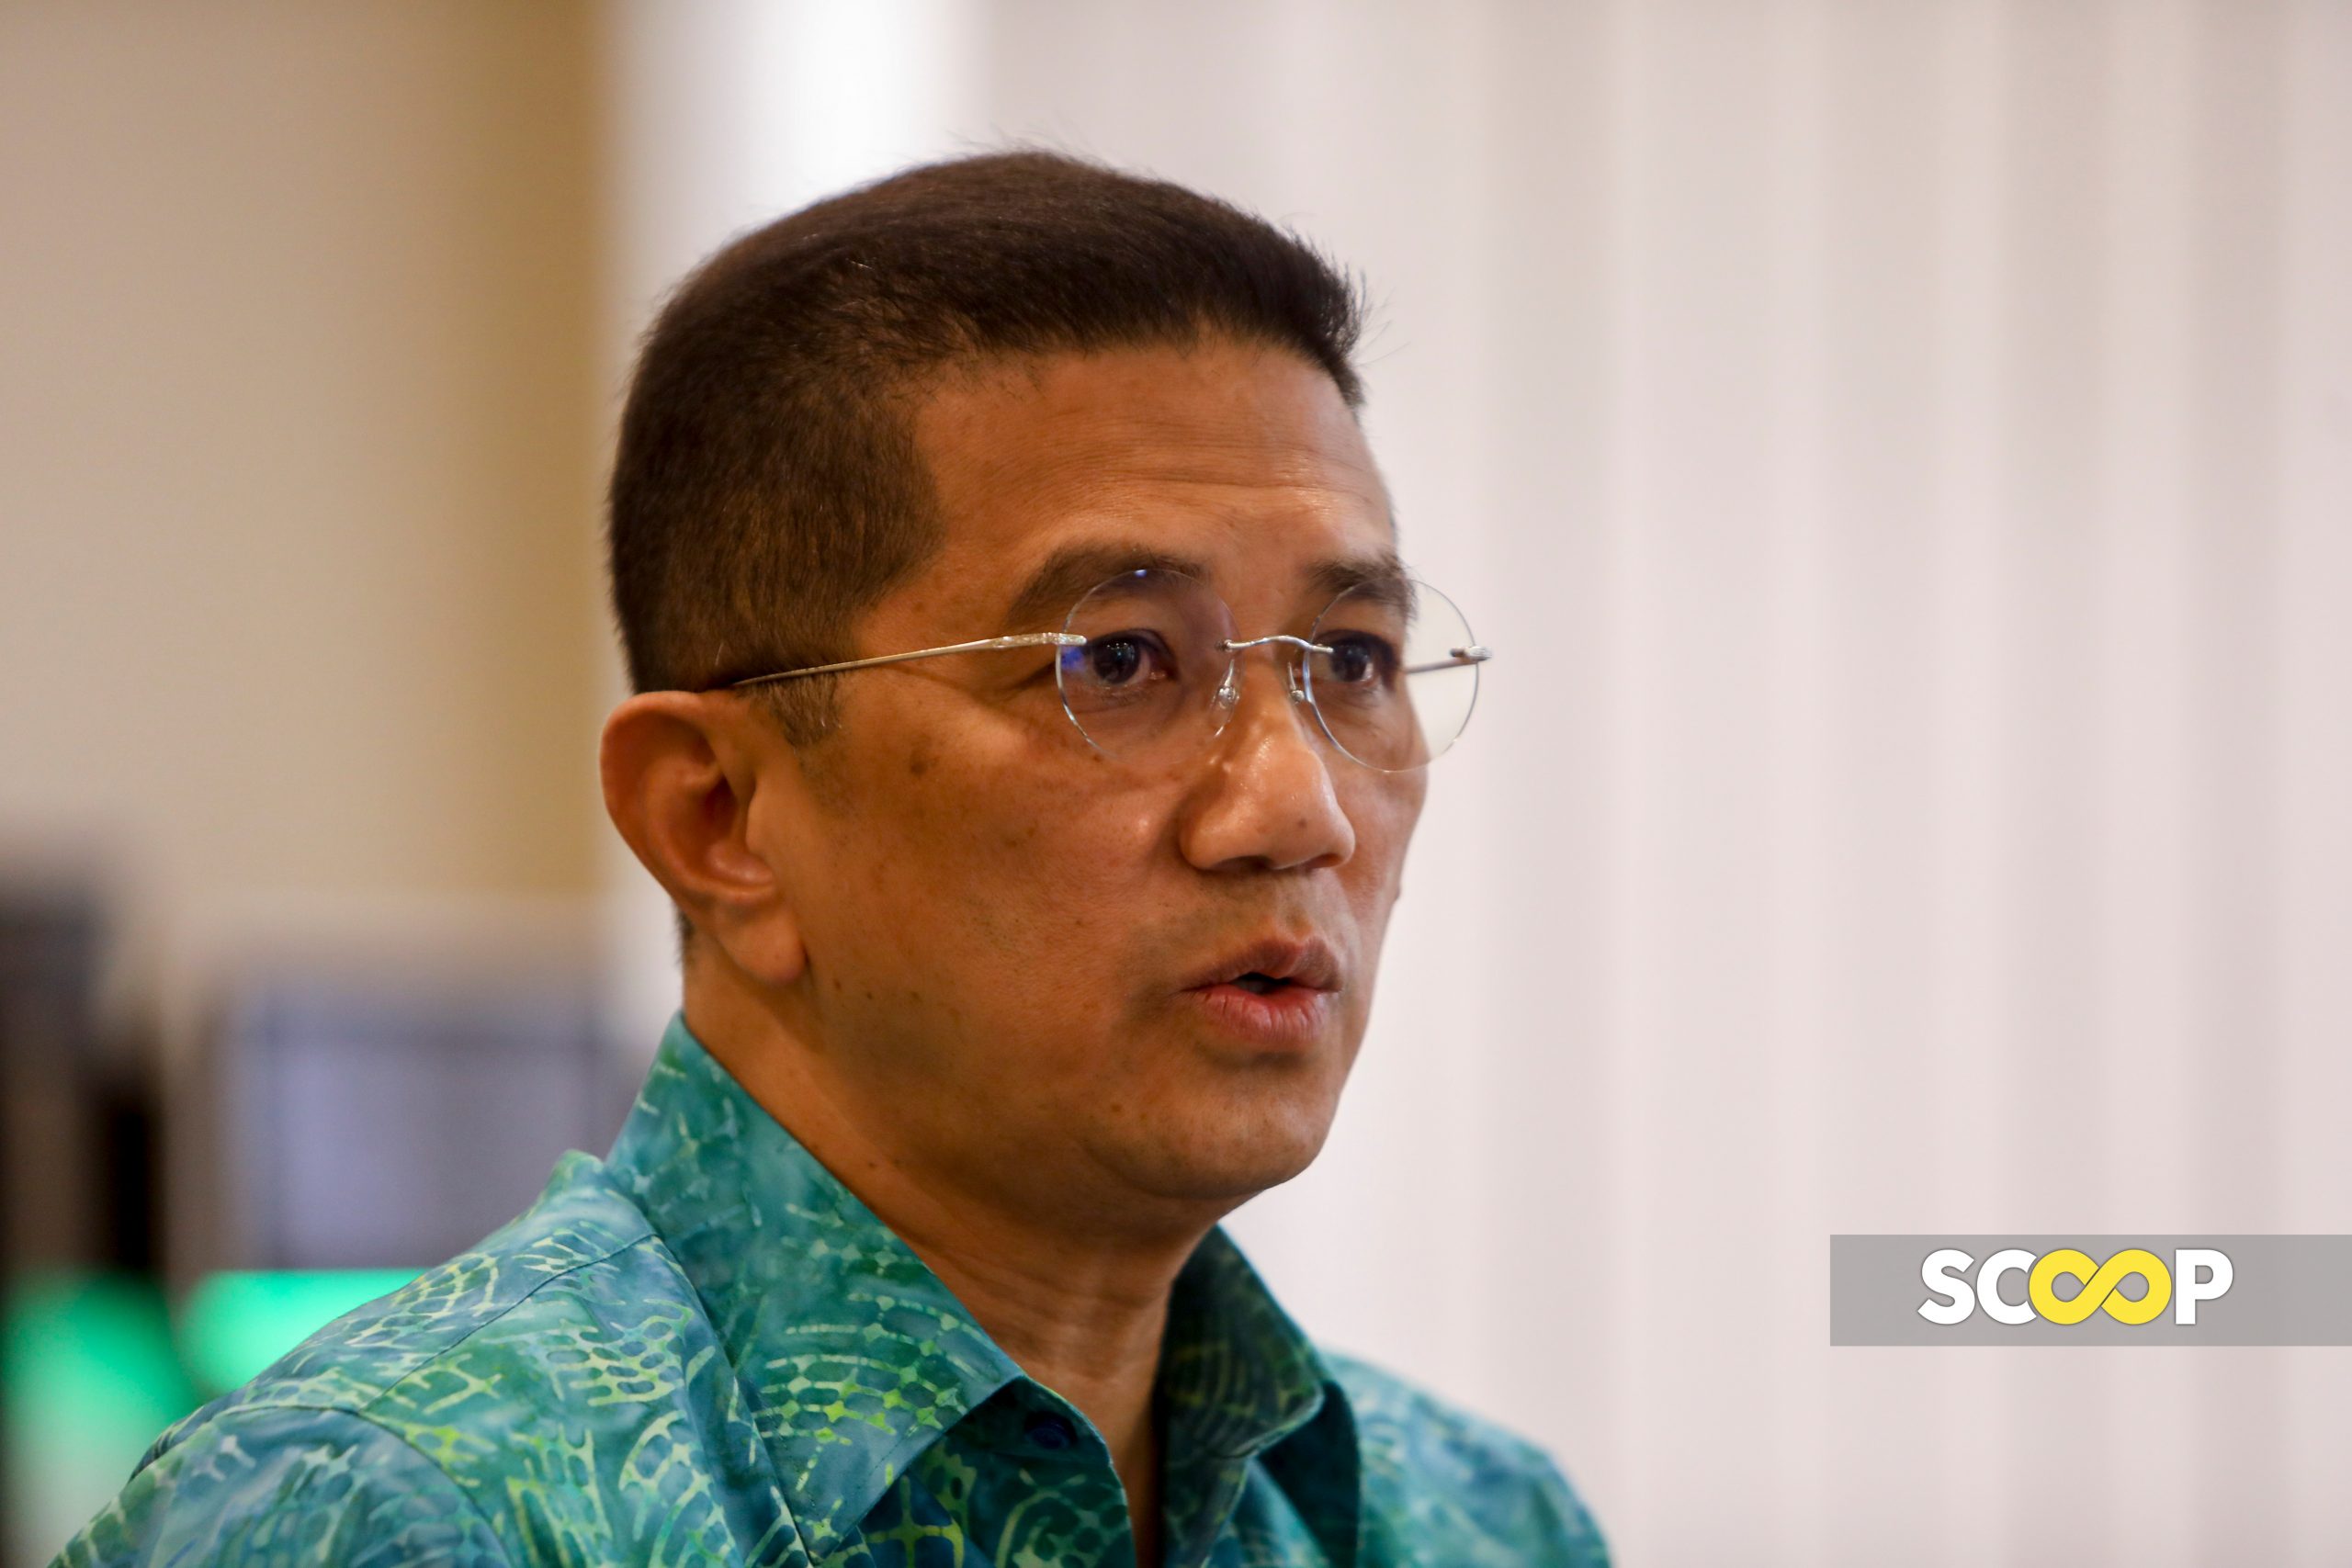 Growing support among non-Malays, PN eyes up to 35 seats in Selangor: Azmin